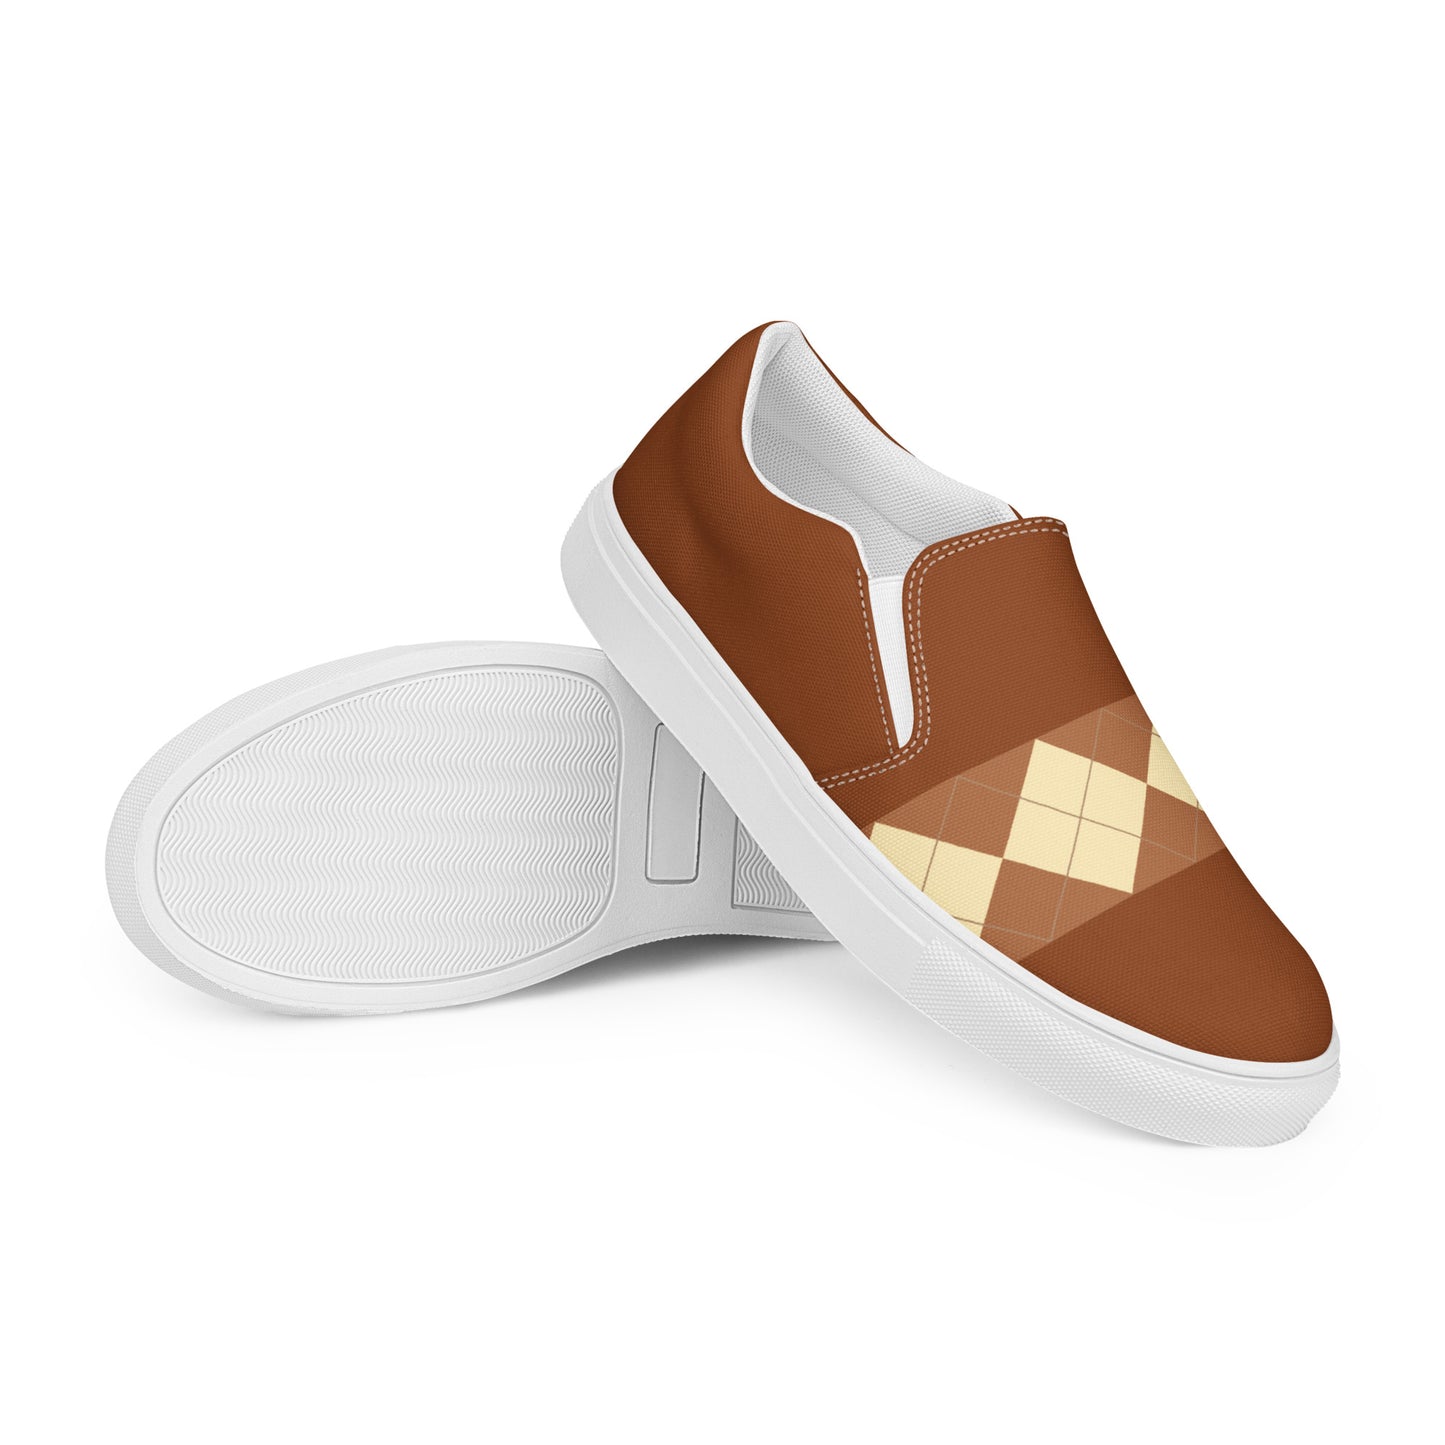 Klasik - Inspired By Taylor Swift - Sustainably Made Women’s slip-on canvas shoes